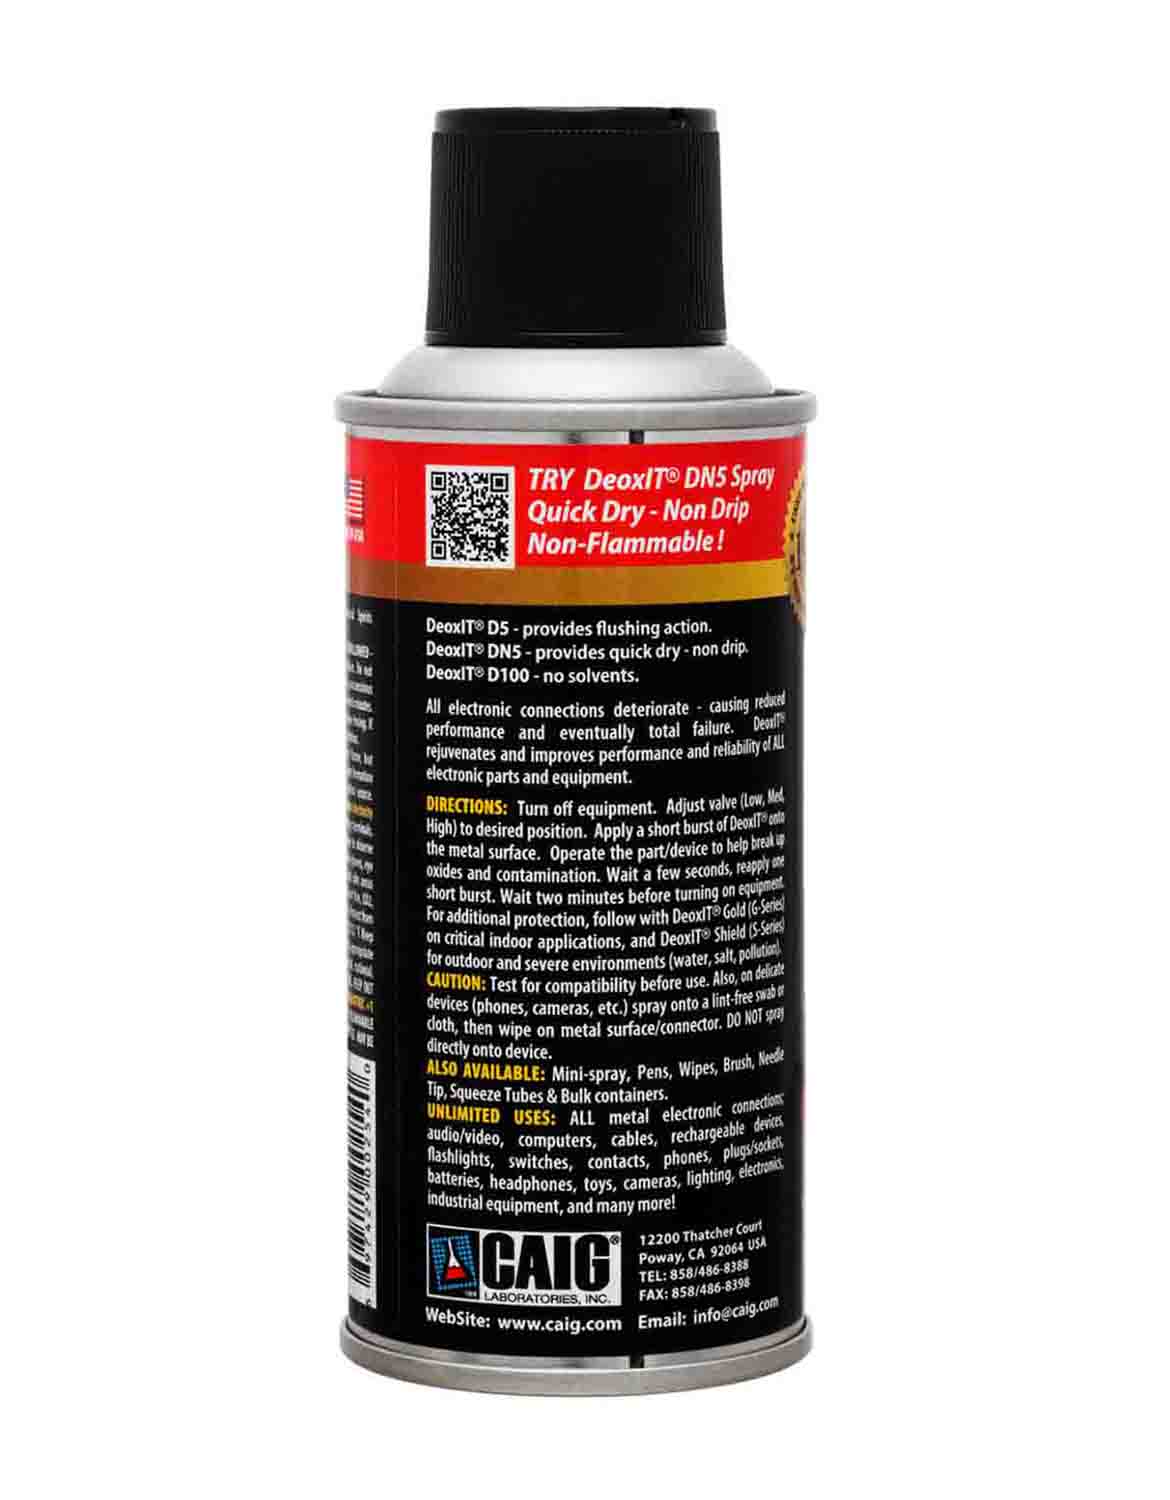 CAIG LABORATORIES DeoxIT D5S-6-LMH, Spray Contact Cleaner Low-Med-High Valve (Pack of 1, 142g) - Hollywood DJ